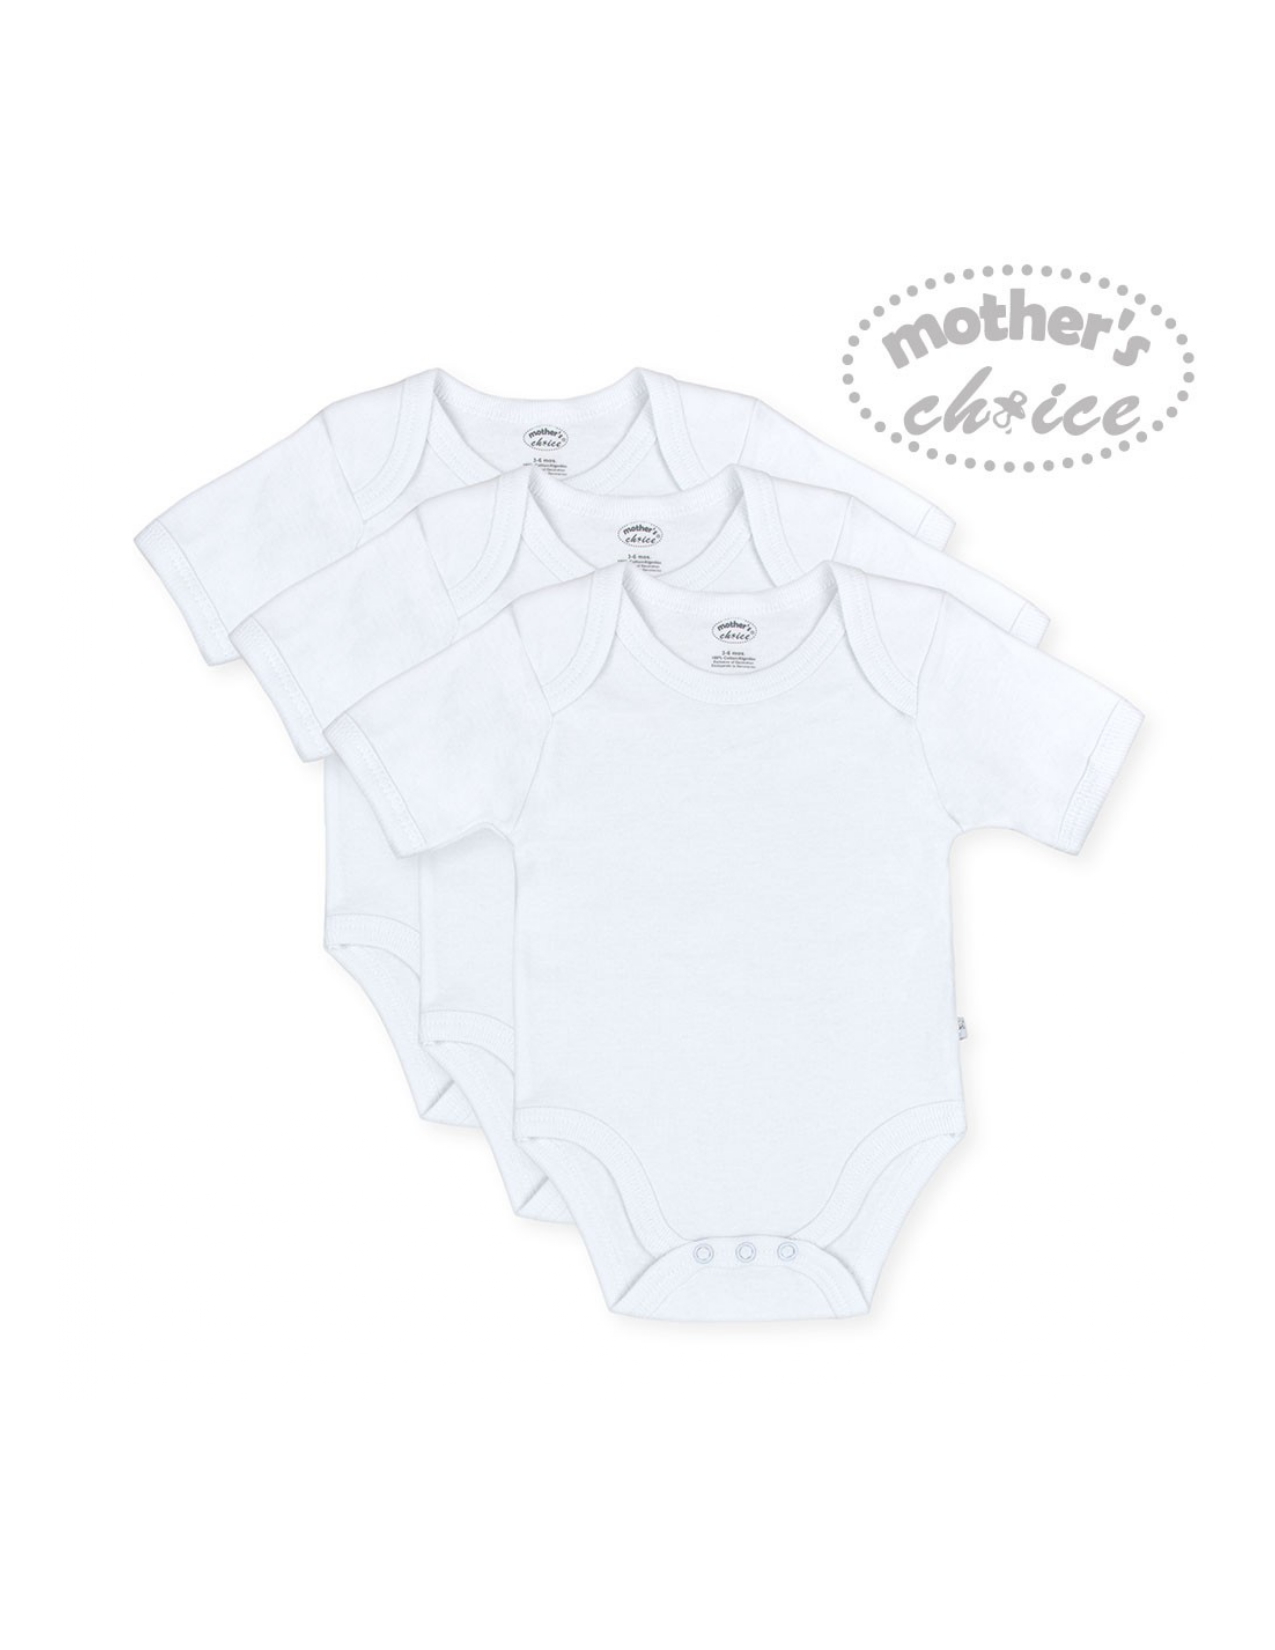 Mother's Choice All-White 3 Pcs In A Pack Short Sleeves Bodysuits